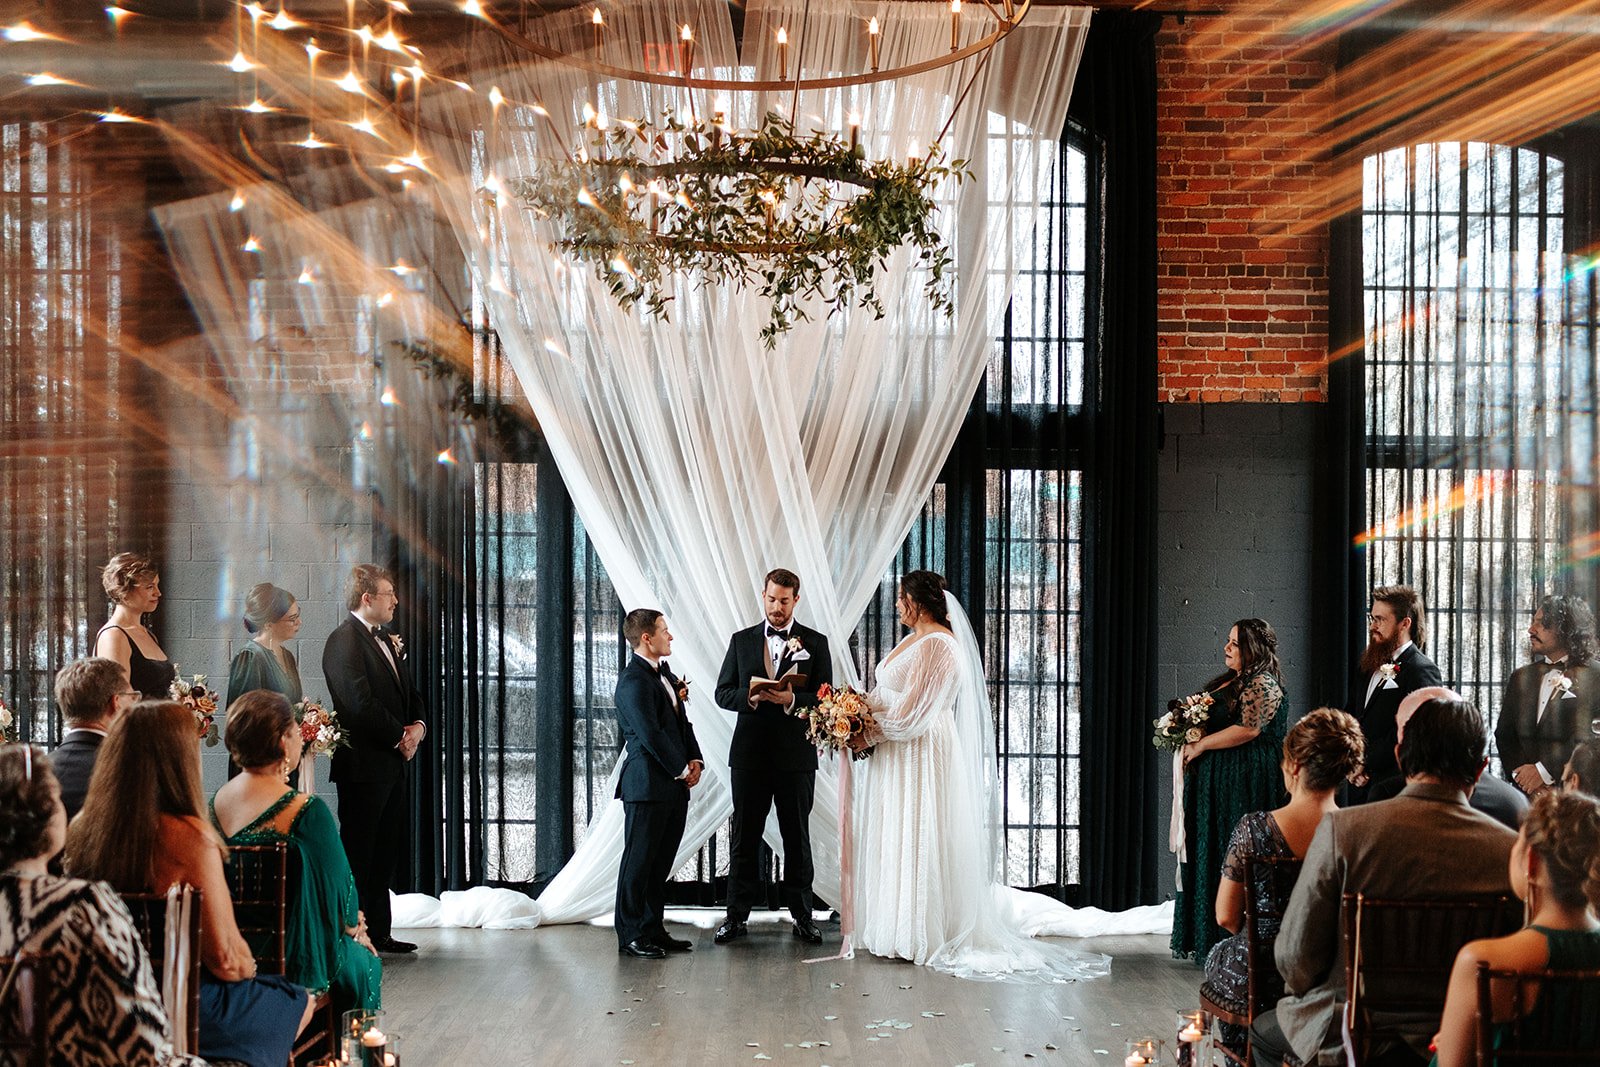  A couple stands at their altar with a sheer white tapestry backdrop behind them as they listen to their officiant. The two-tiered chandelier above them is decorated with greenery, and their wedding party watches the ceremony from either side.  